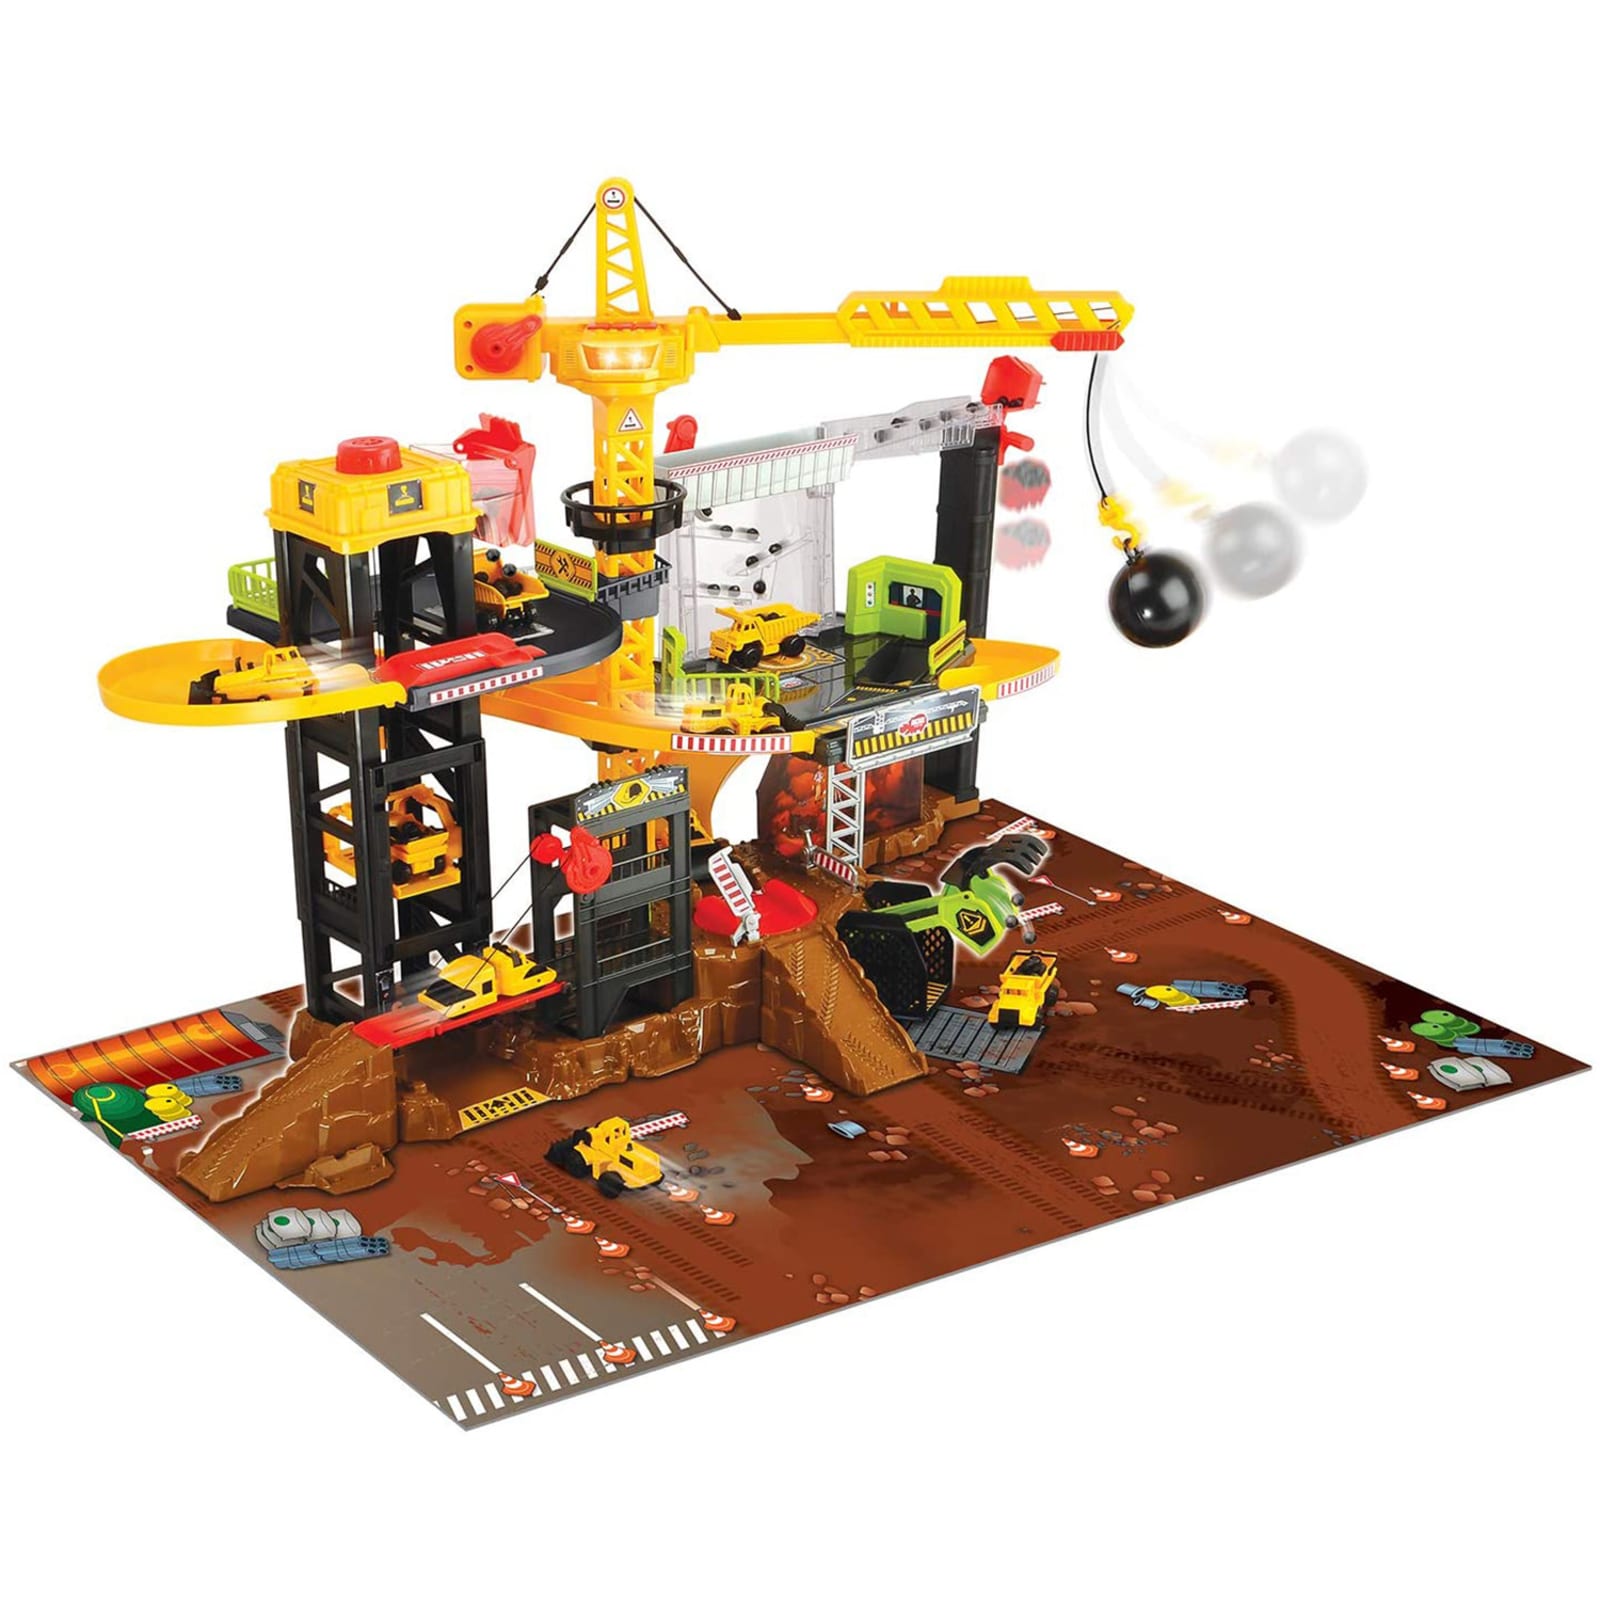 Construction Playset by Dickie Toys at Fleet Farm